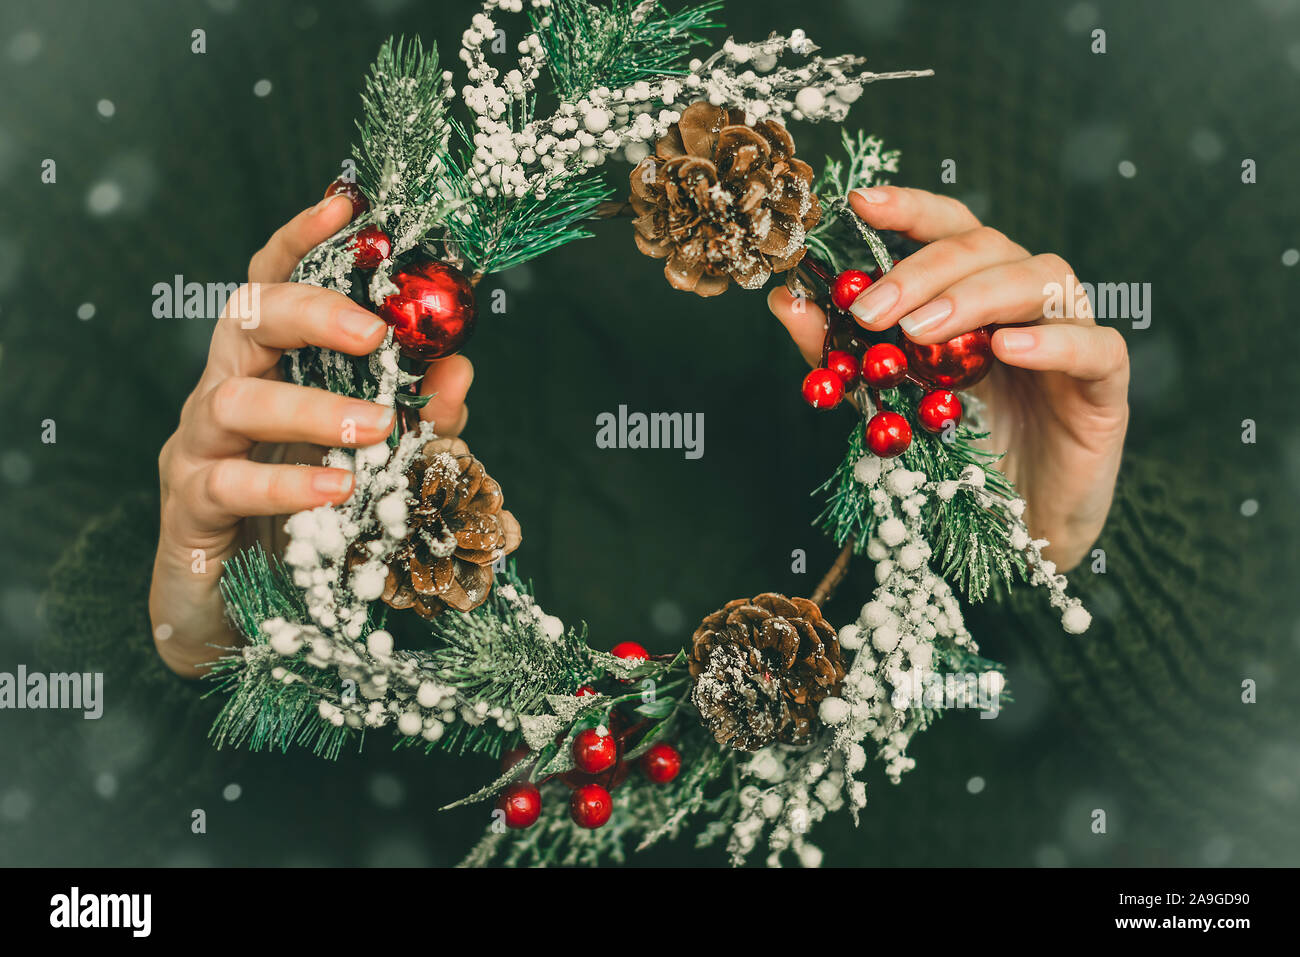 Pine wreath and Christmas decor in female hands on a green background. New Year Stock Photo